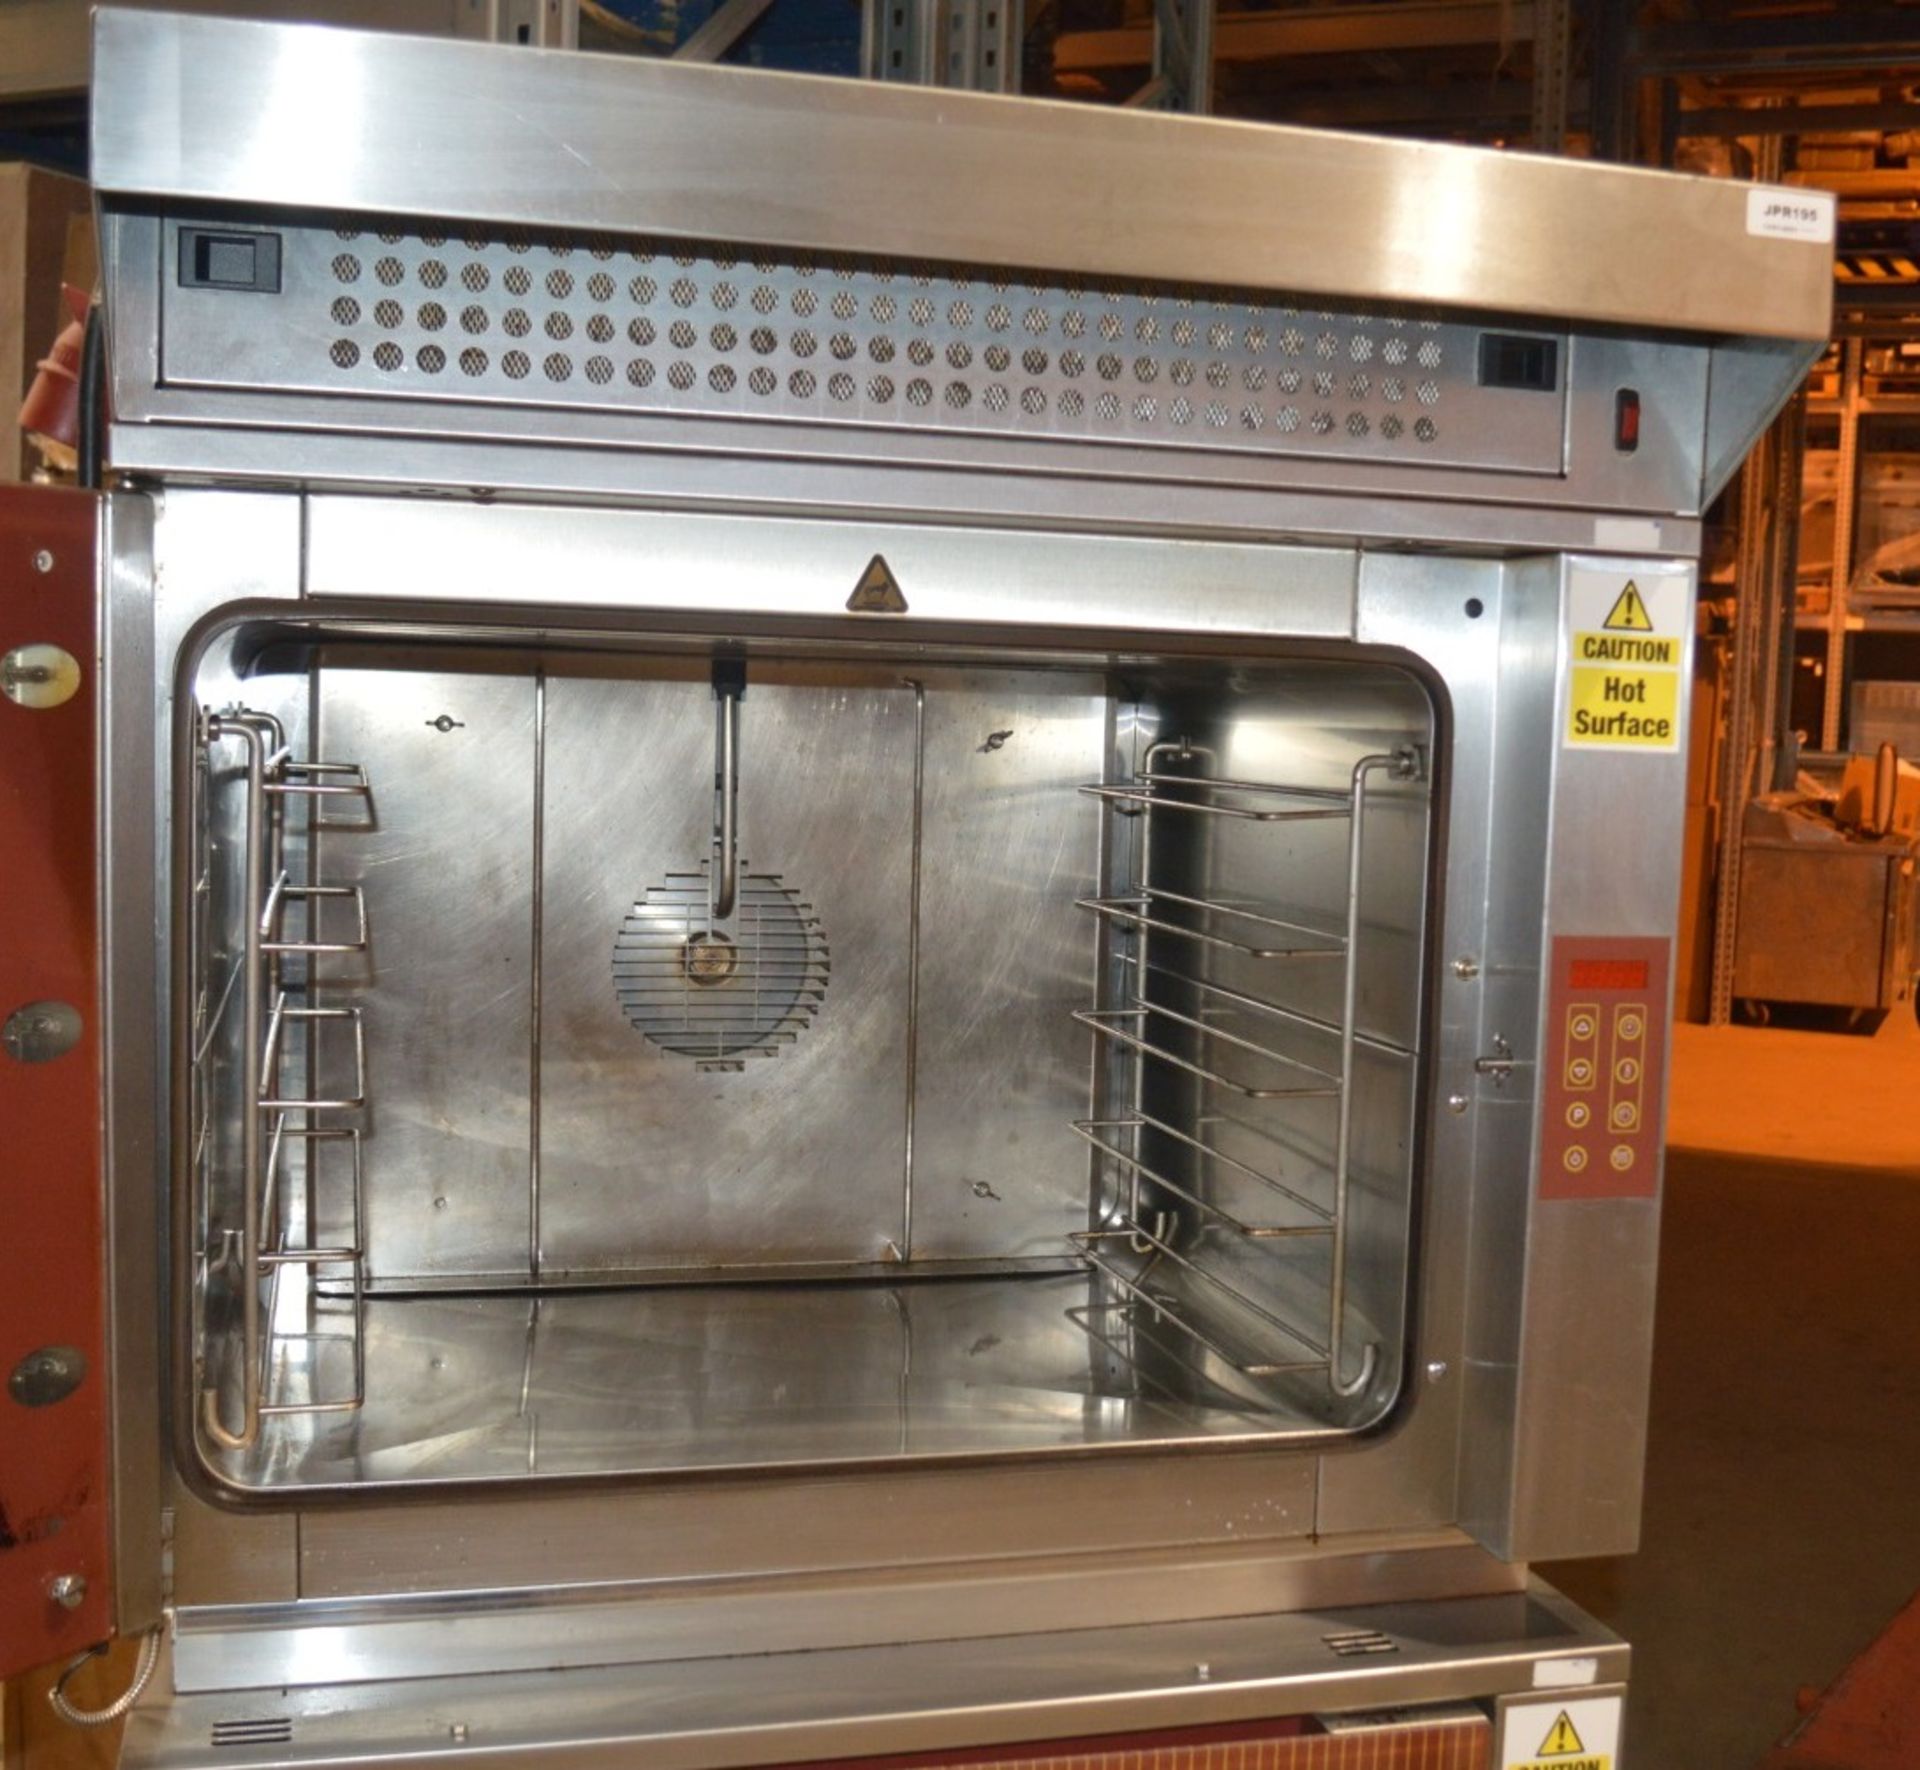 1 x FRI-JADO Stainless Steel Commercial Double Oven And Stand - Dimensions: H180 x W84 x D83cm - - Image 6 of 12